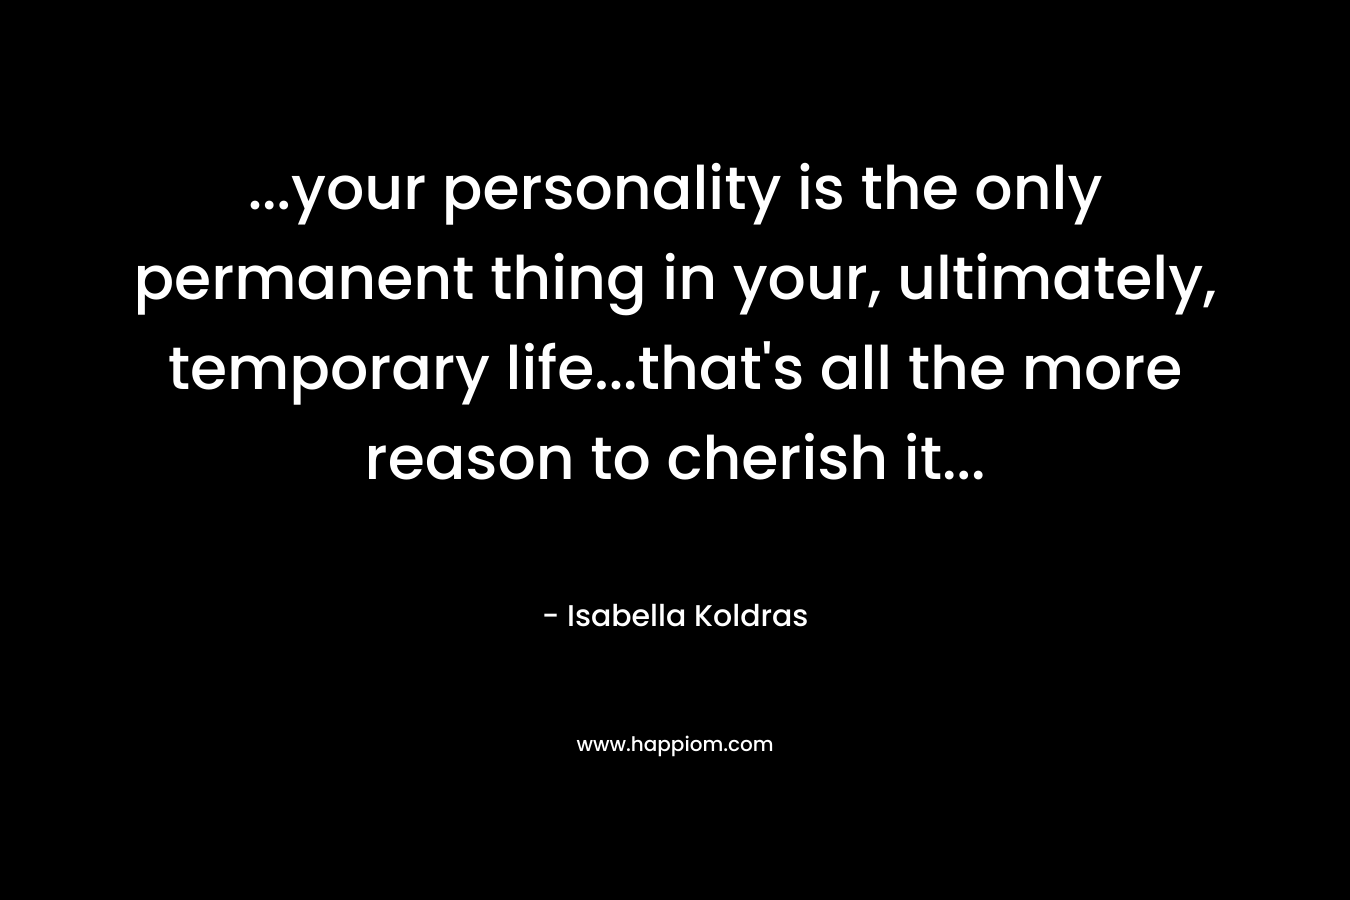 …your personality is the only permanent thing in your, ultimately, temporary life…that’s all the more reason to cherish it… – Isabella Koldras